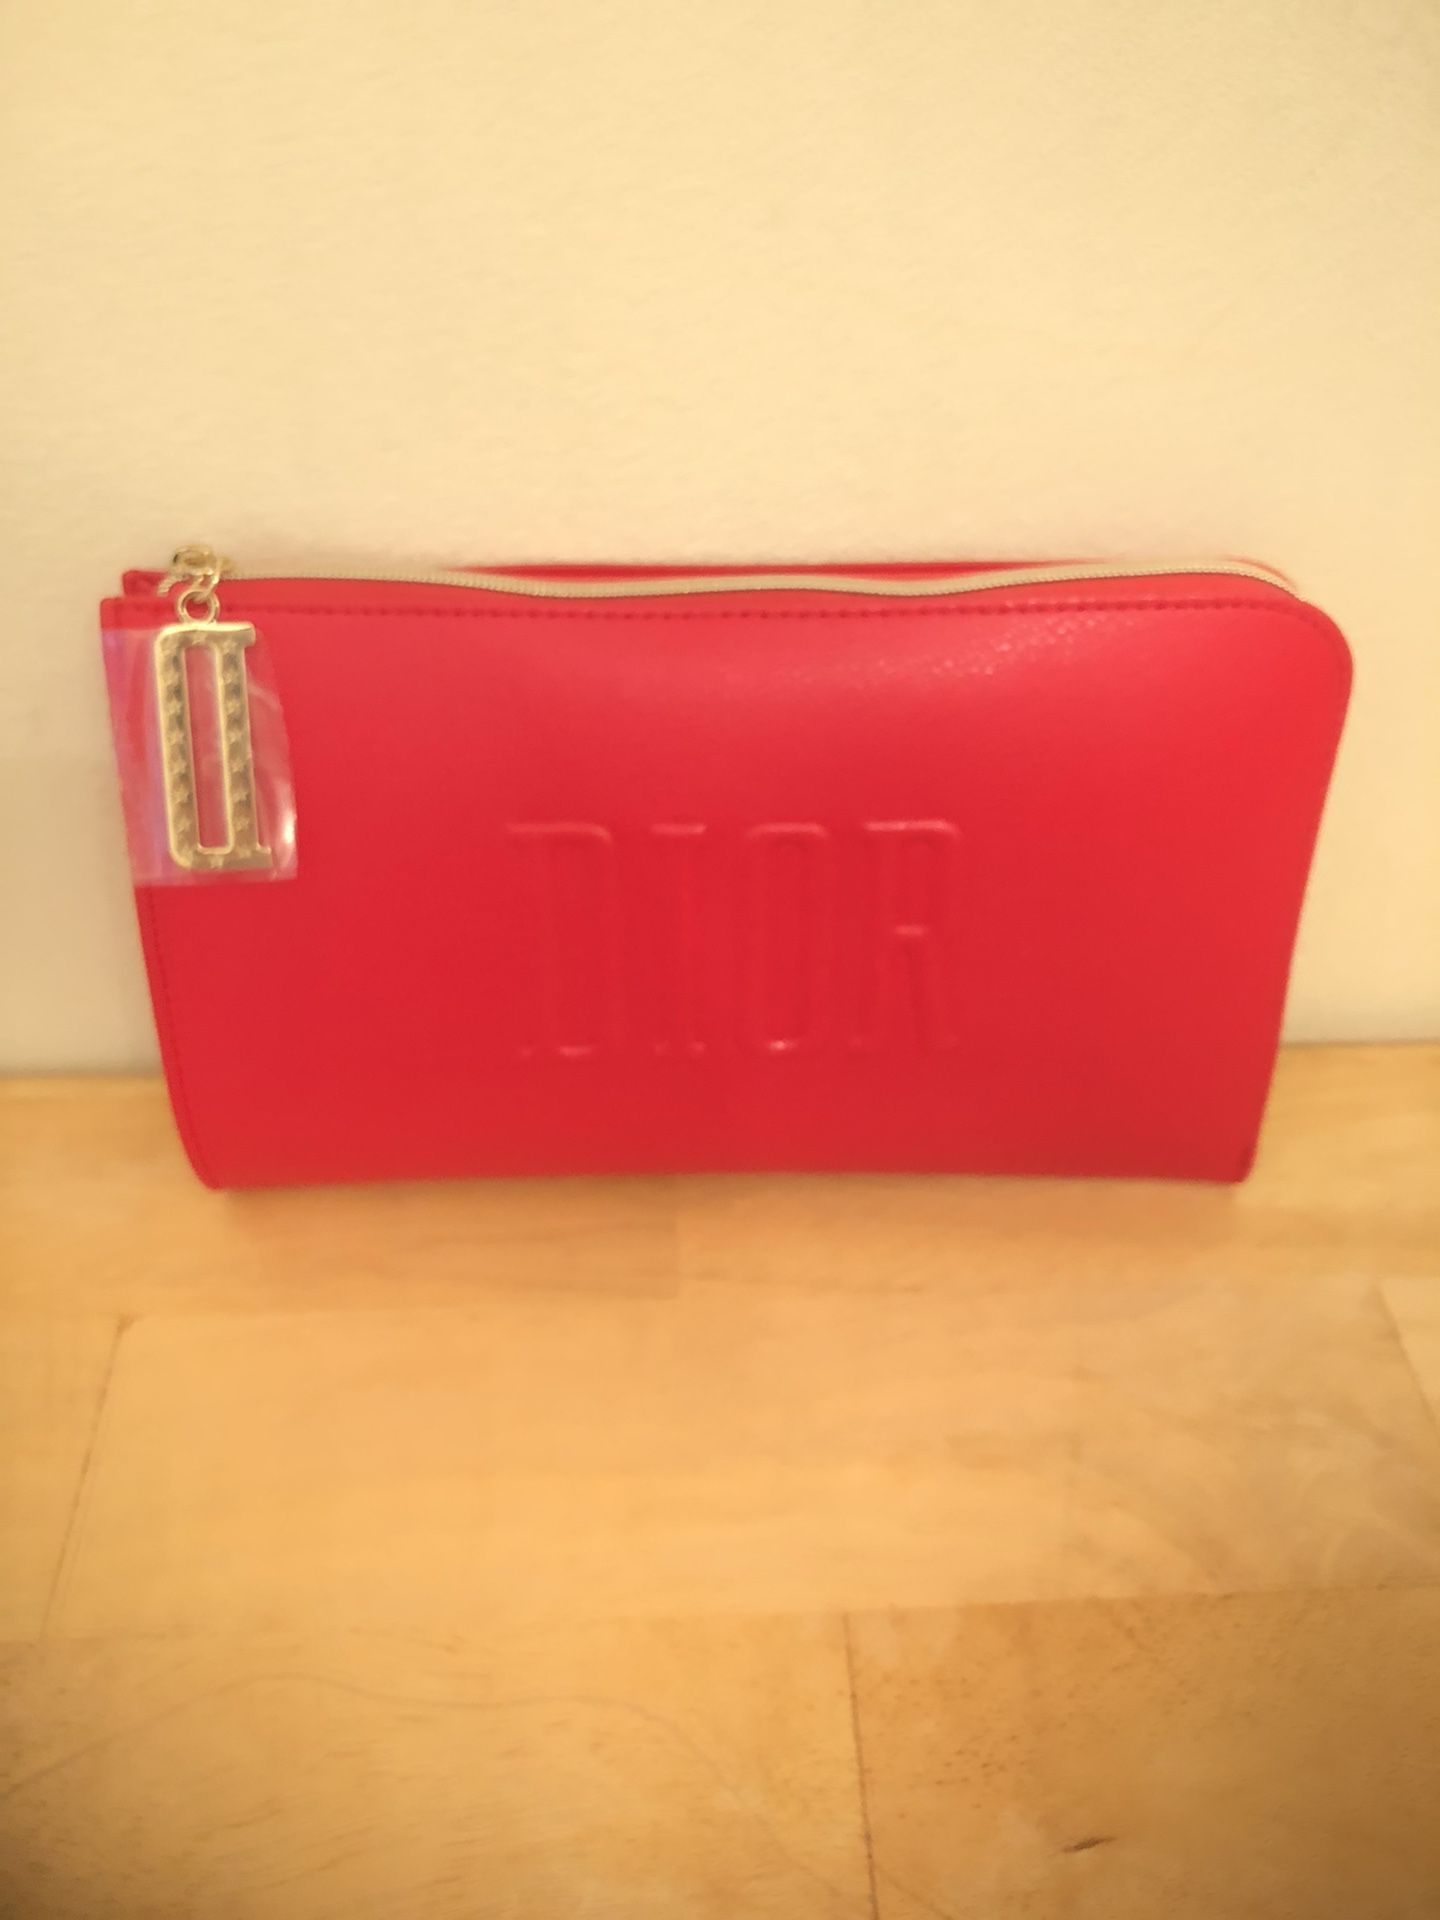 New Red Christian Dior MakeUp Bag for Sale in Boca Raton, FL - OfferUp